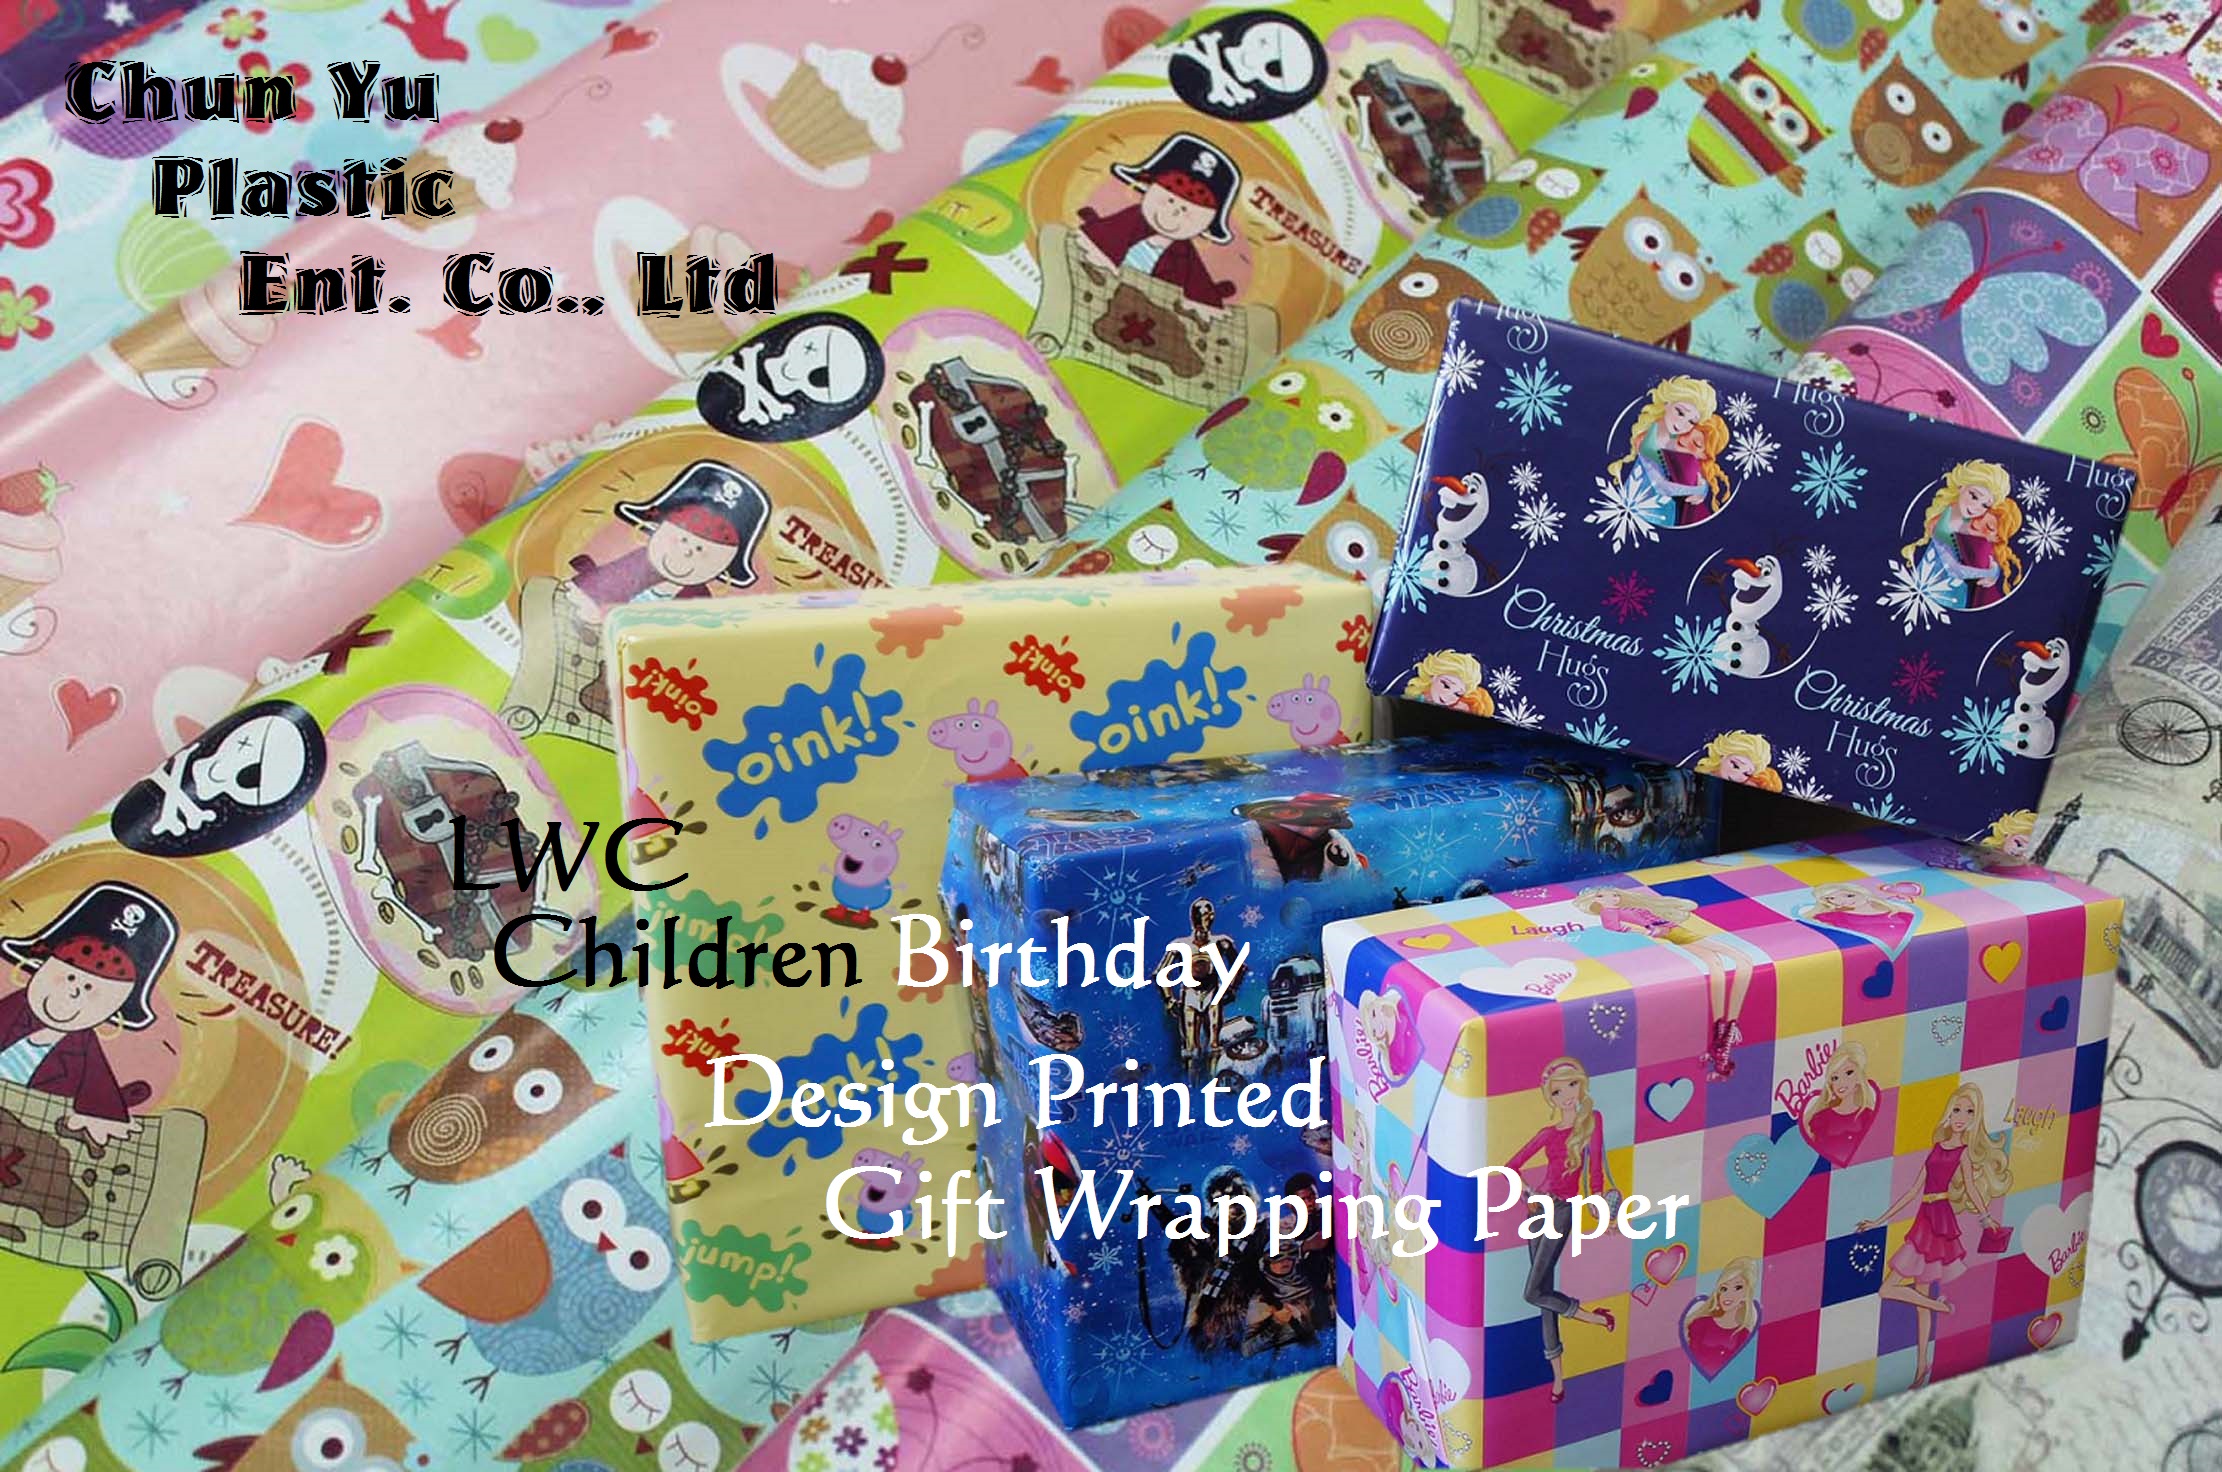 LWC gift wrapping paper printed with girls and boys designs for children birthday celebrations